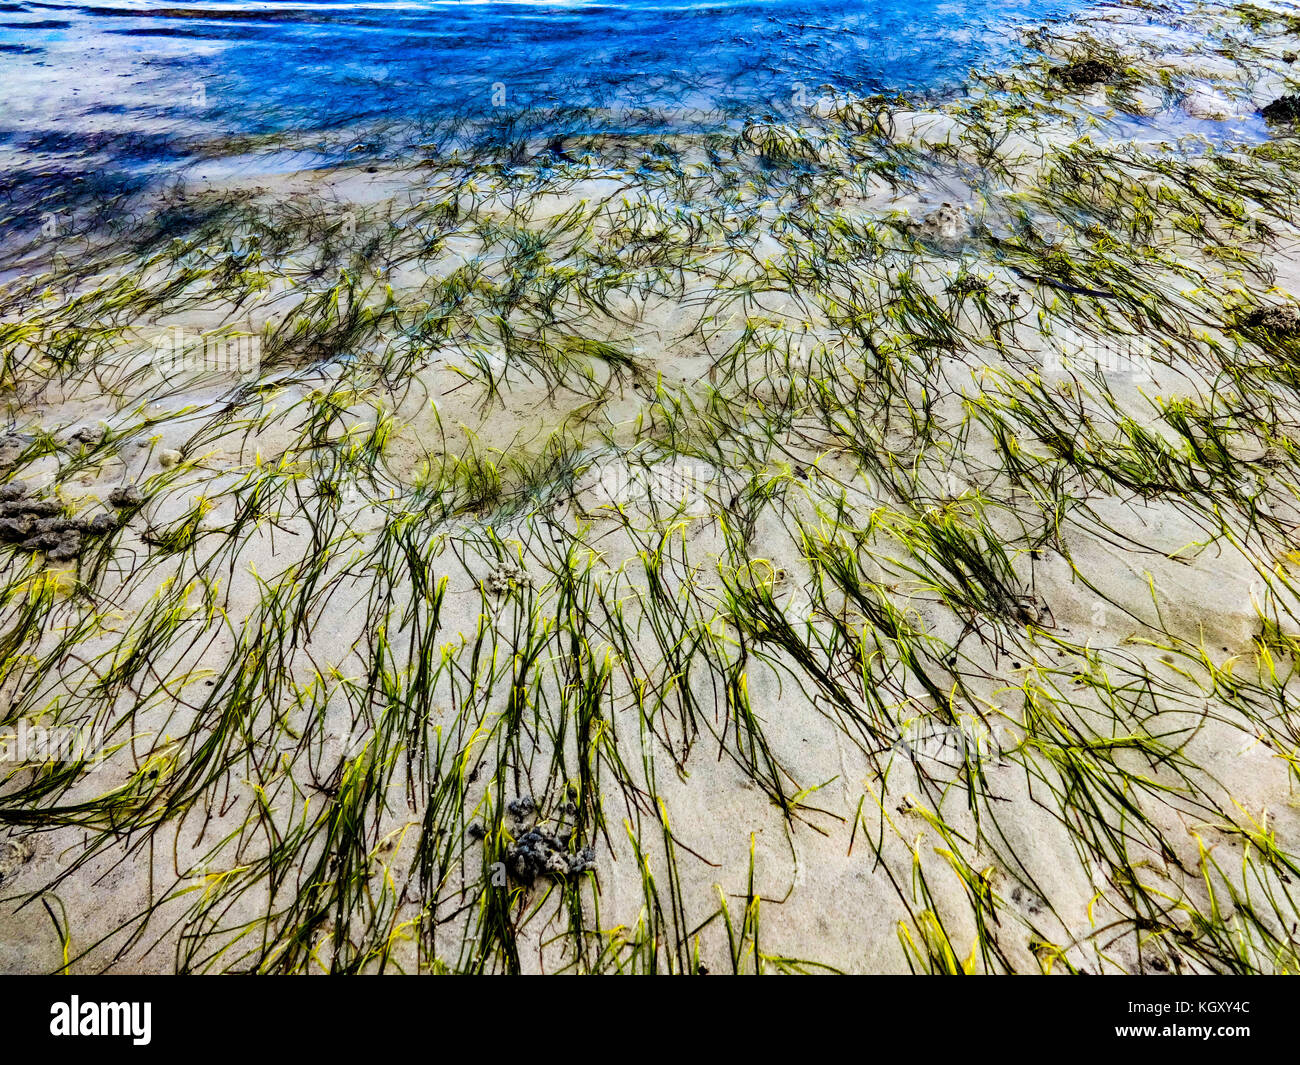 Seaweeds exposed by the low tide in Siquijor Island, Philippines Stock Photo